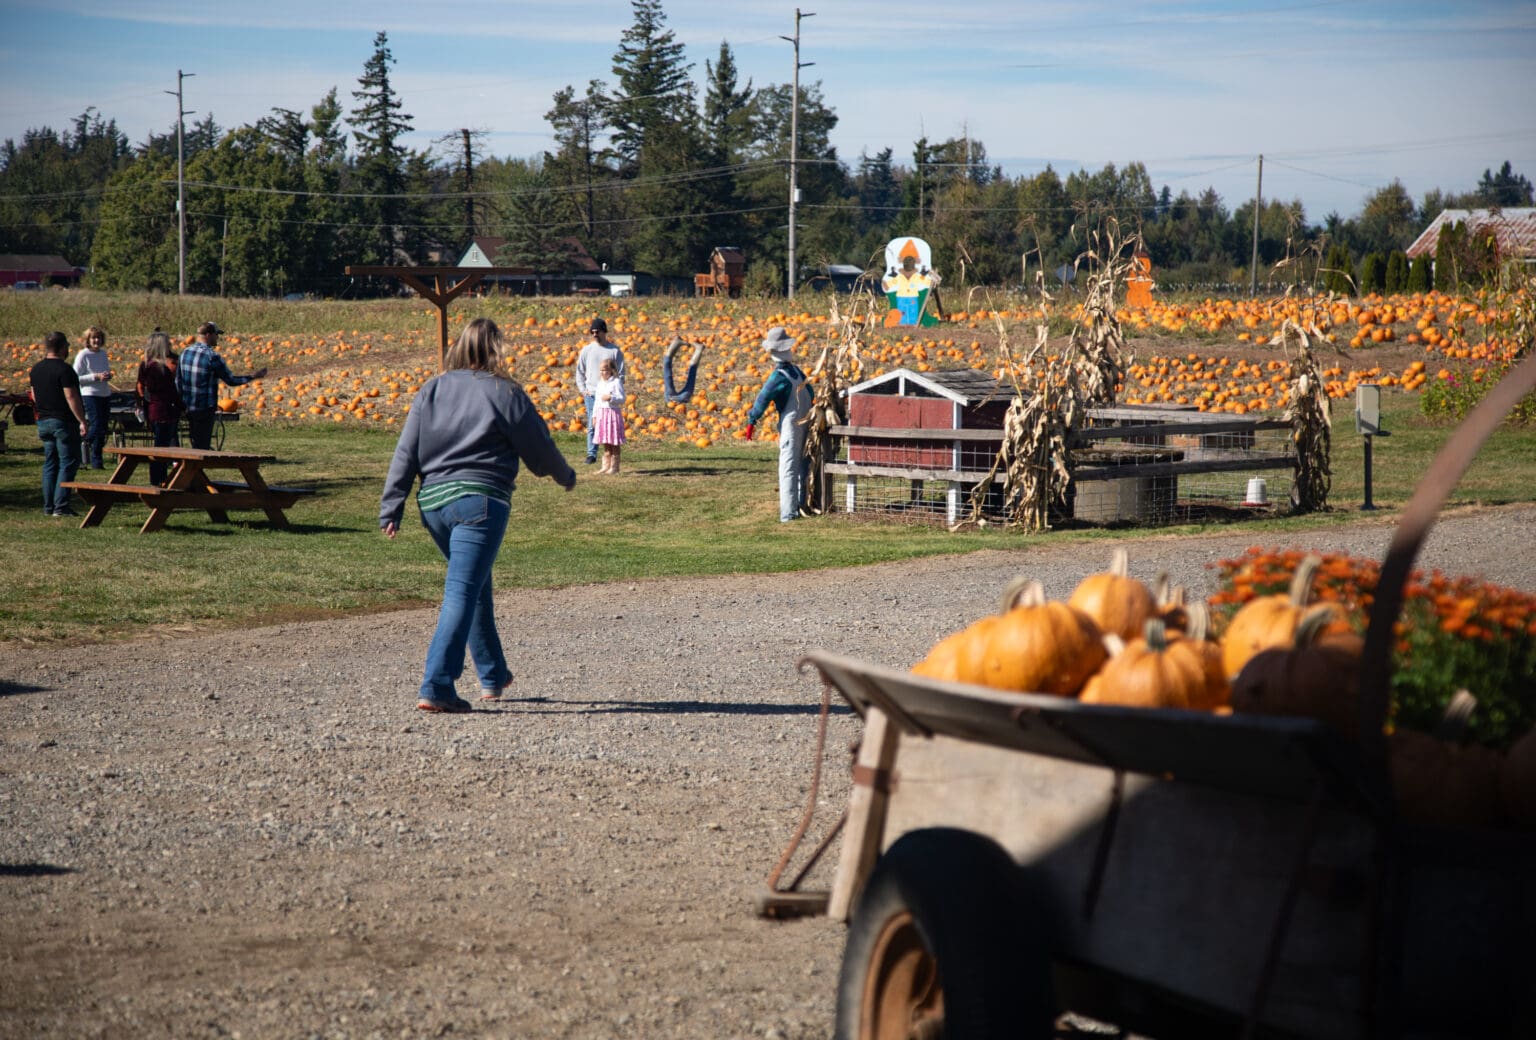 Willetta Farm features a large pumpkin patch and is a popular destination for field trips and locals in October.